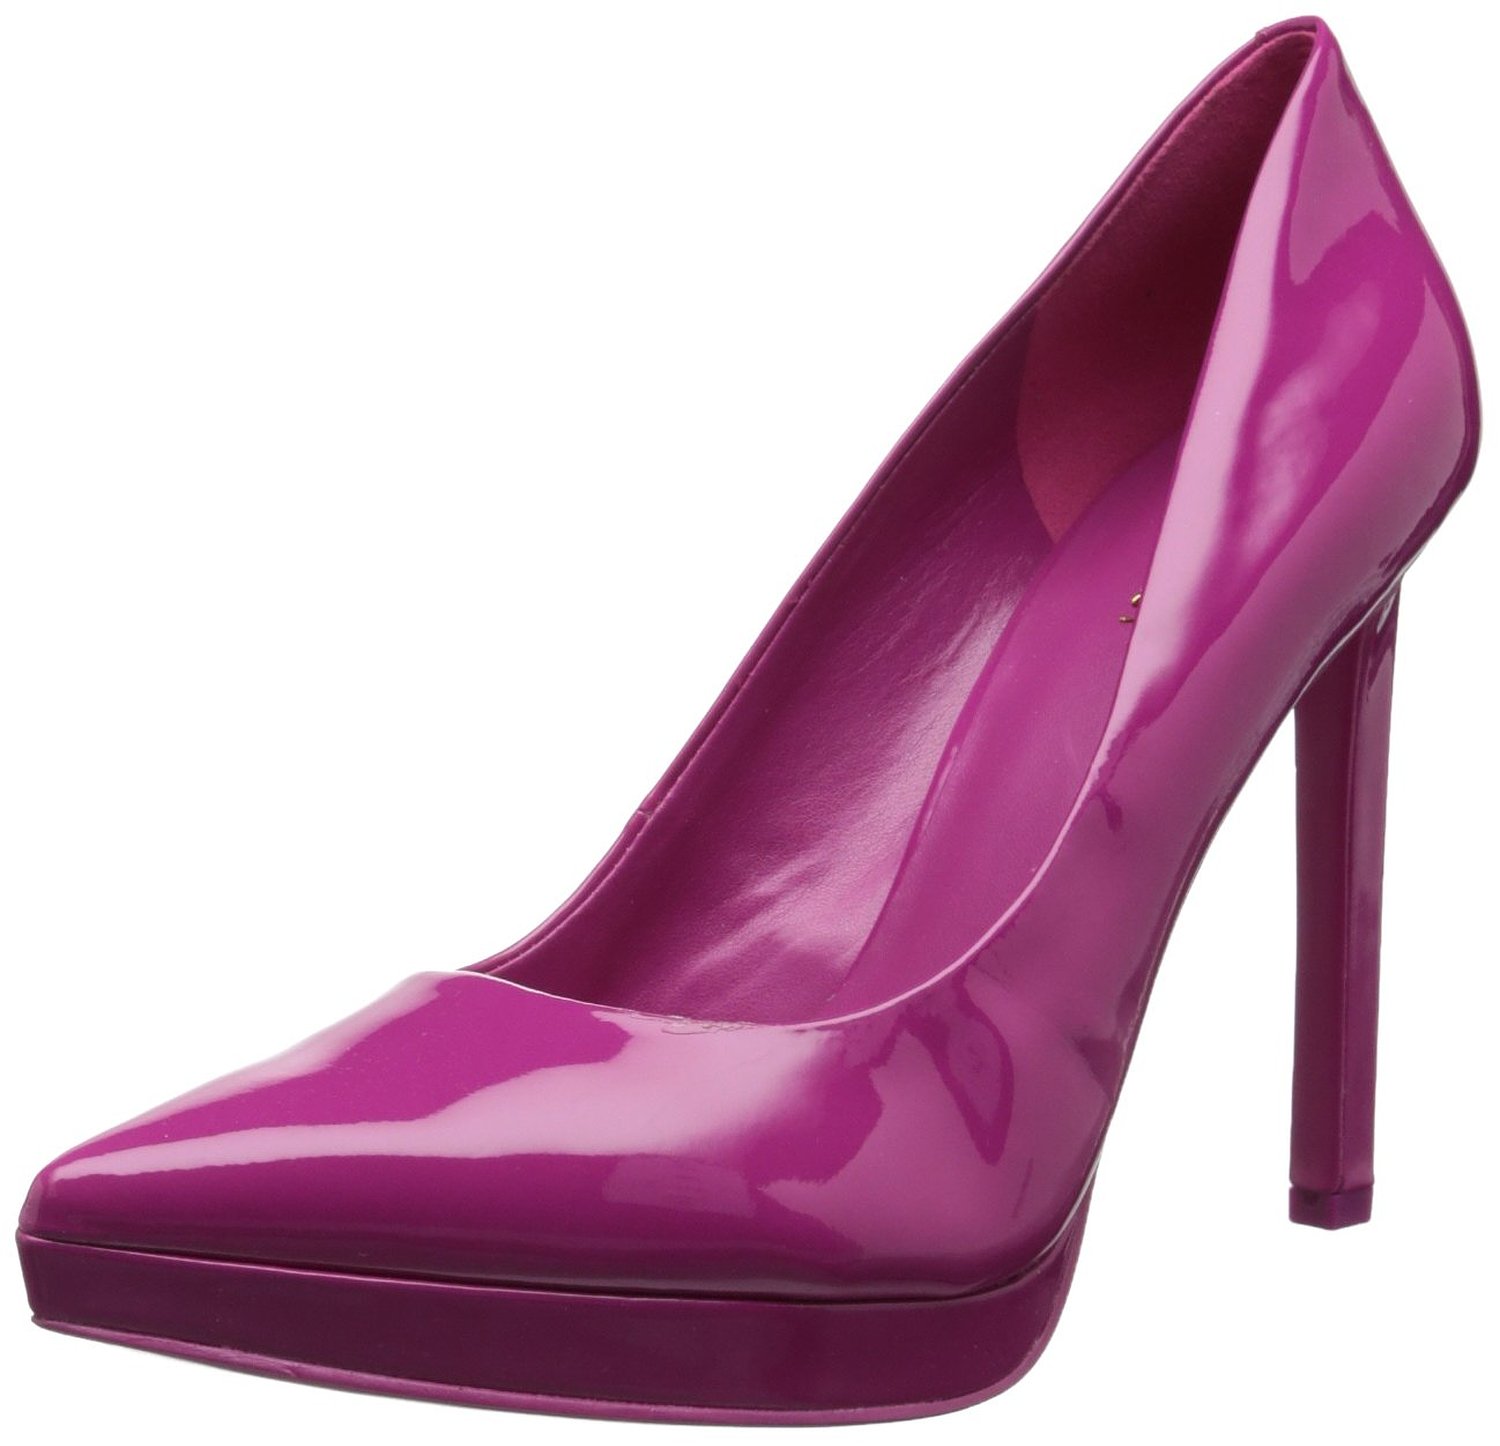 Nine West Women's Redviolet Pump - Visuall.co